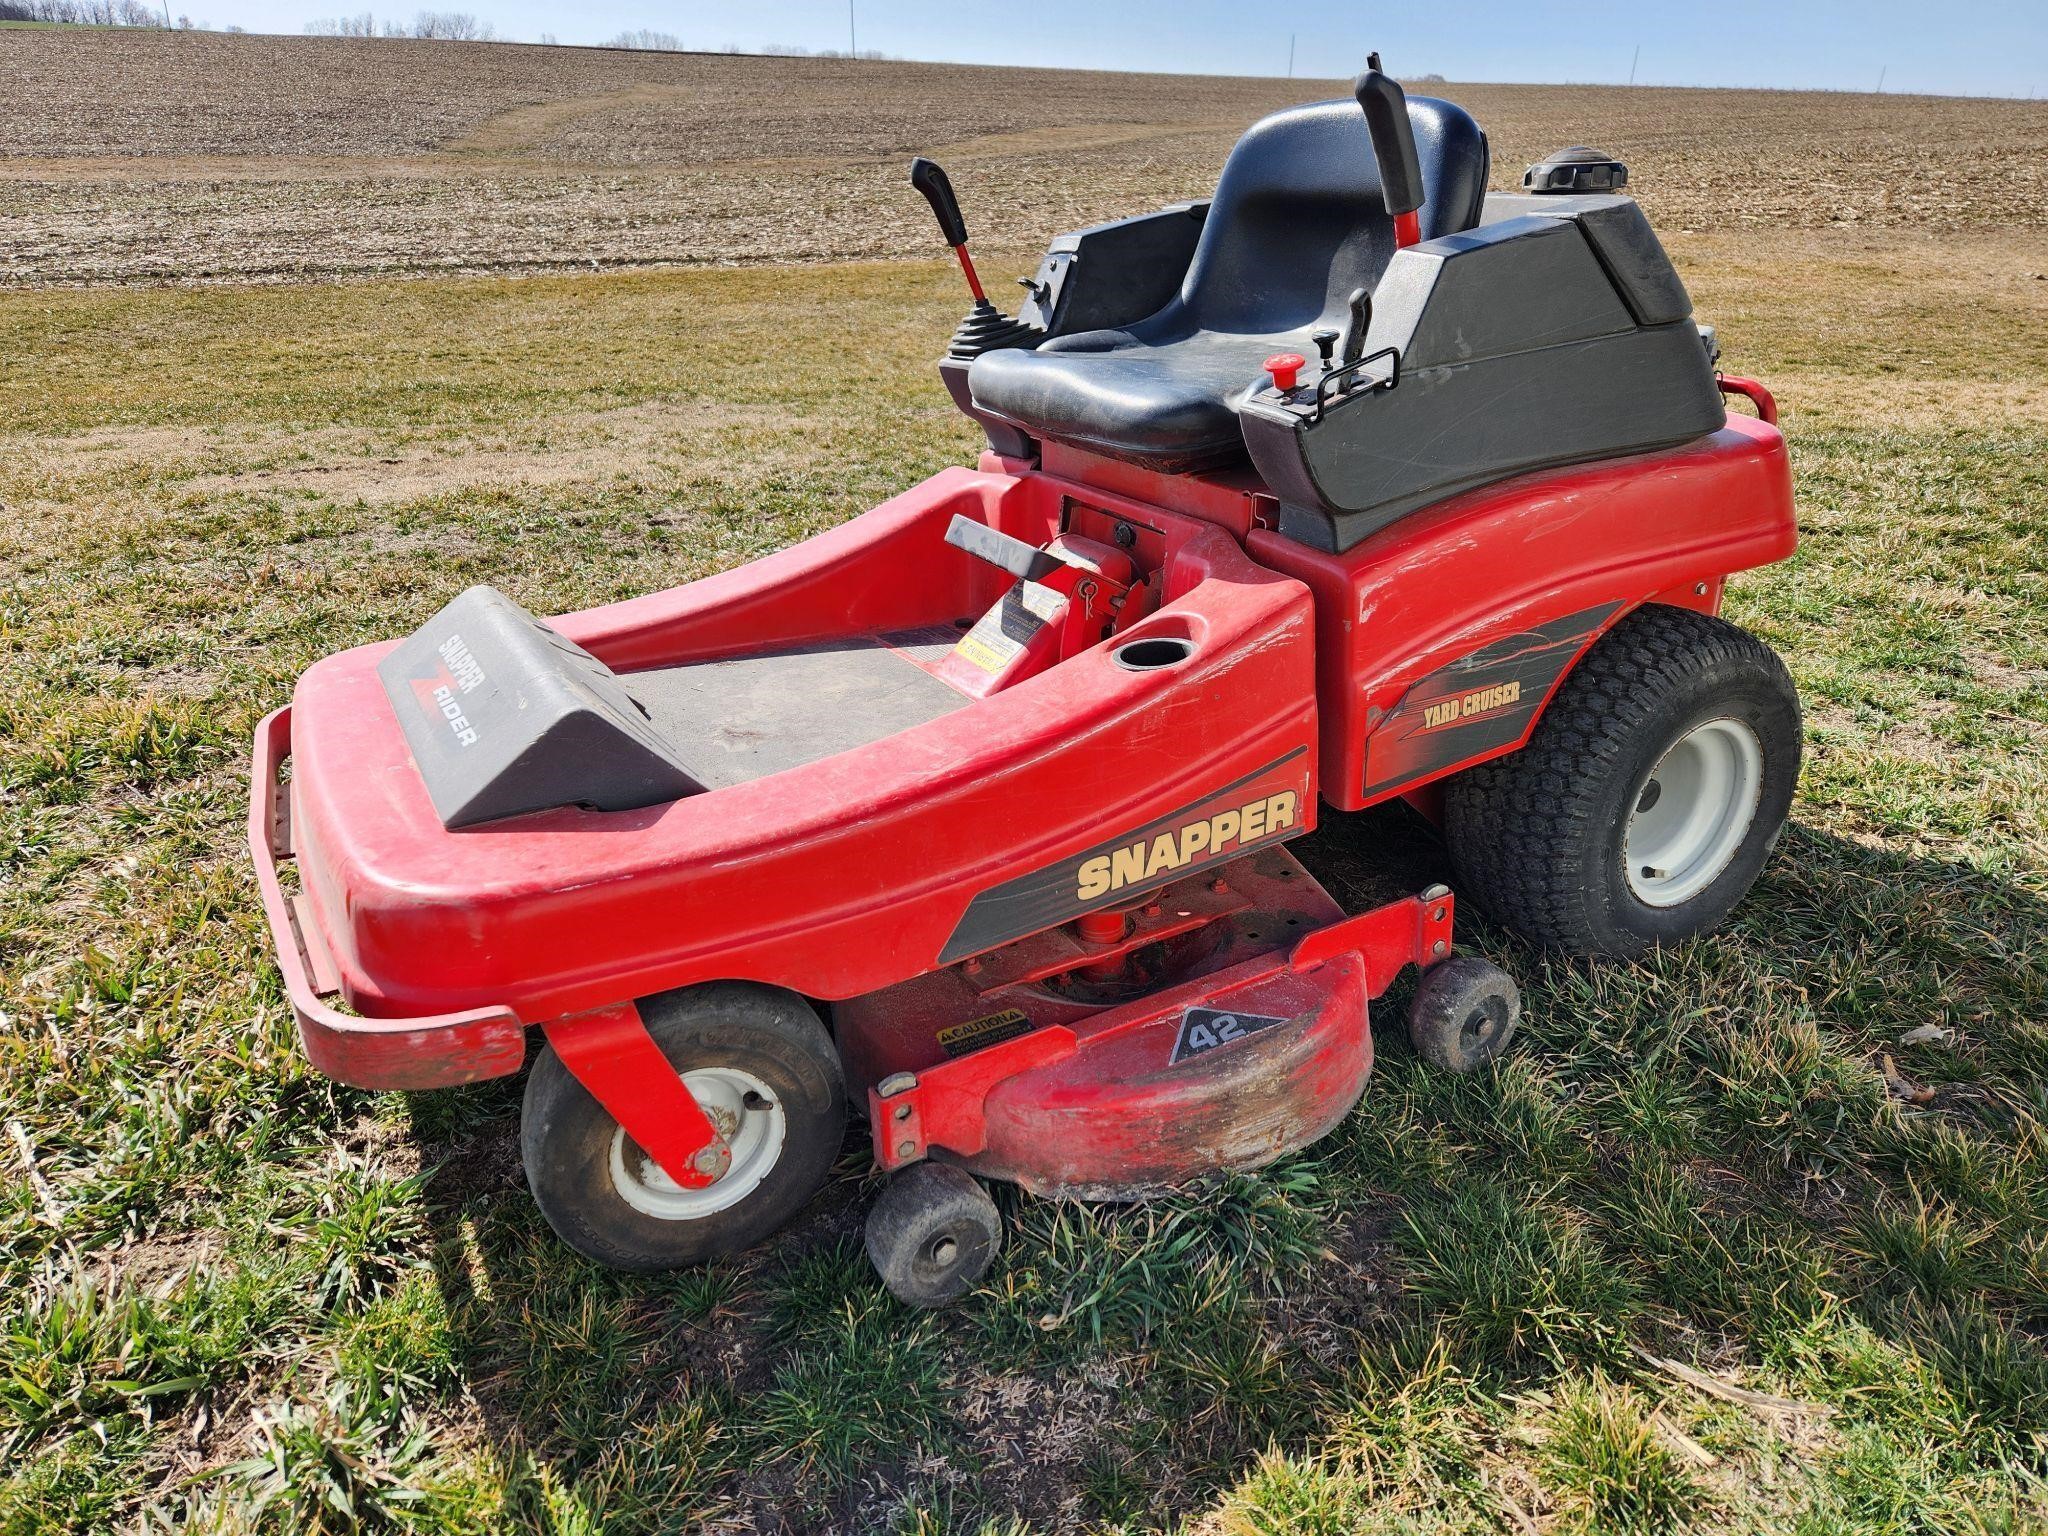 Snapper 42" riding mower